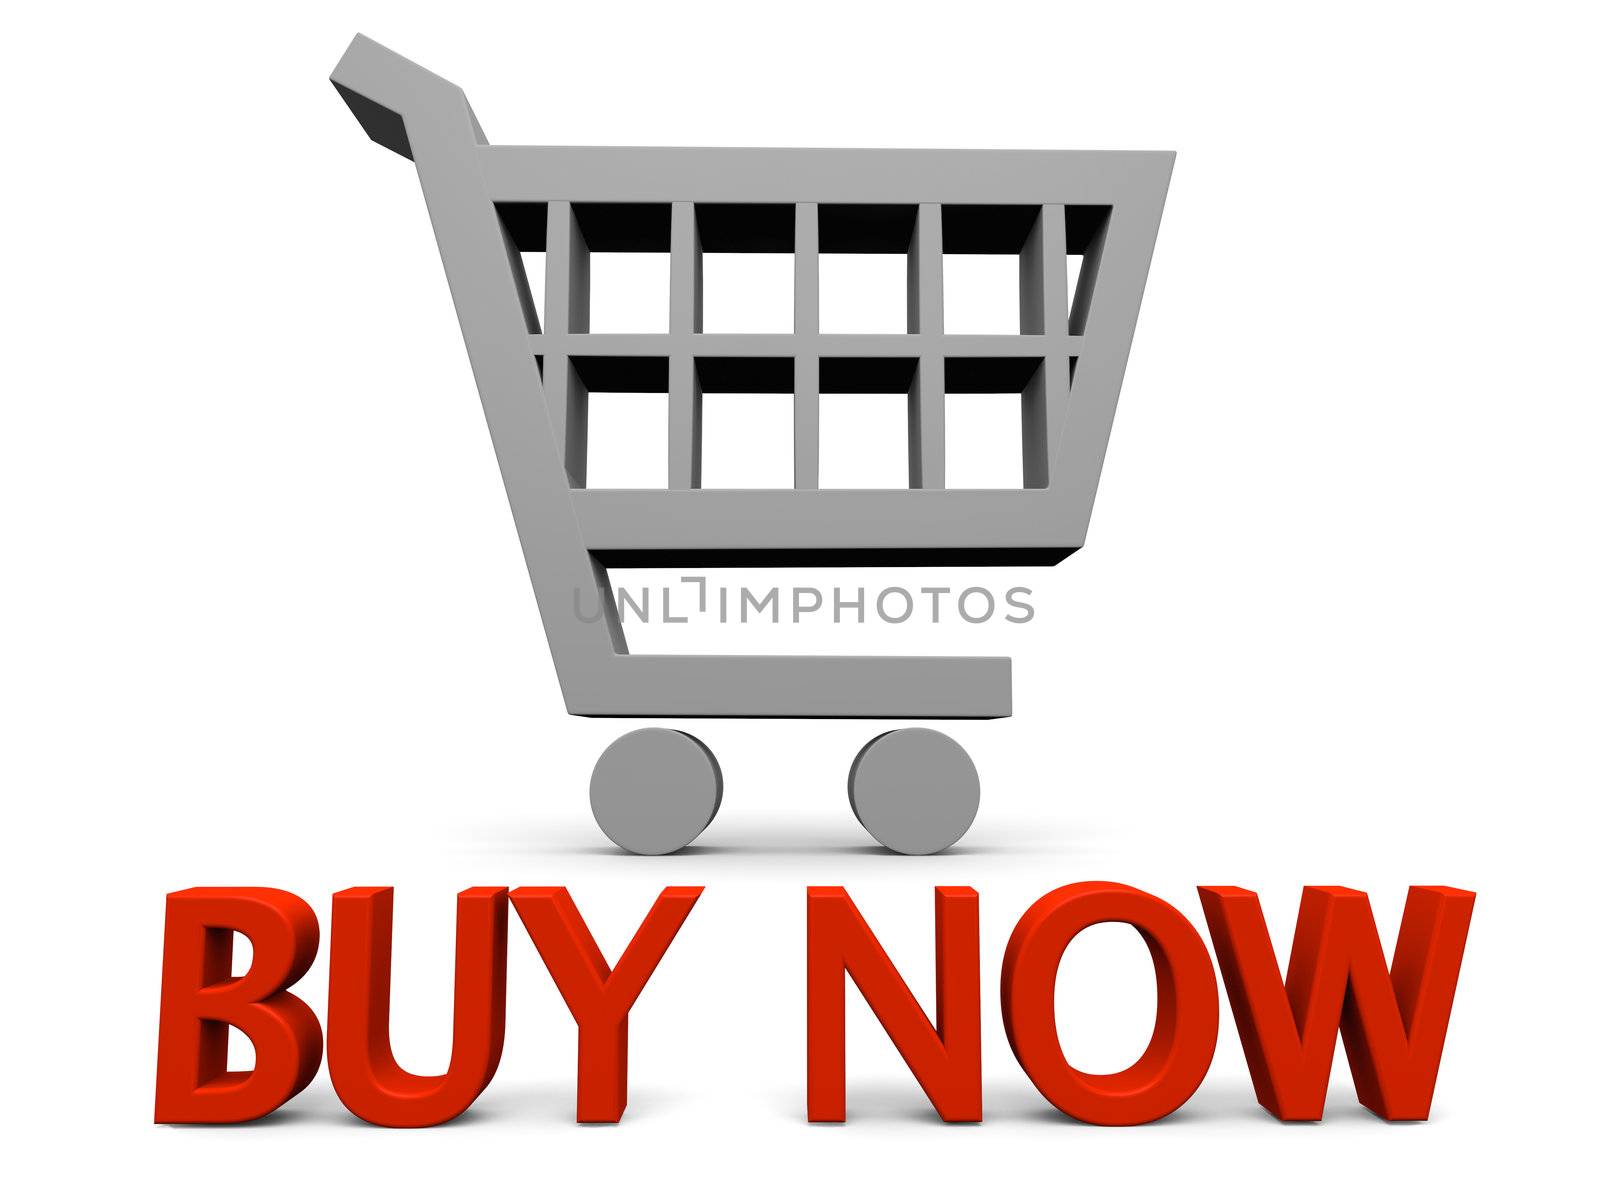 Buy now symbol with shopping cart sign isolated on white background